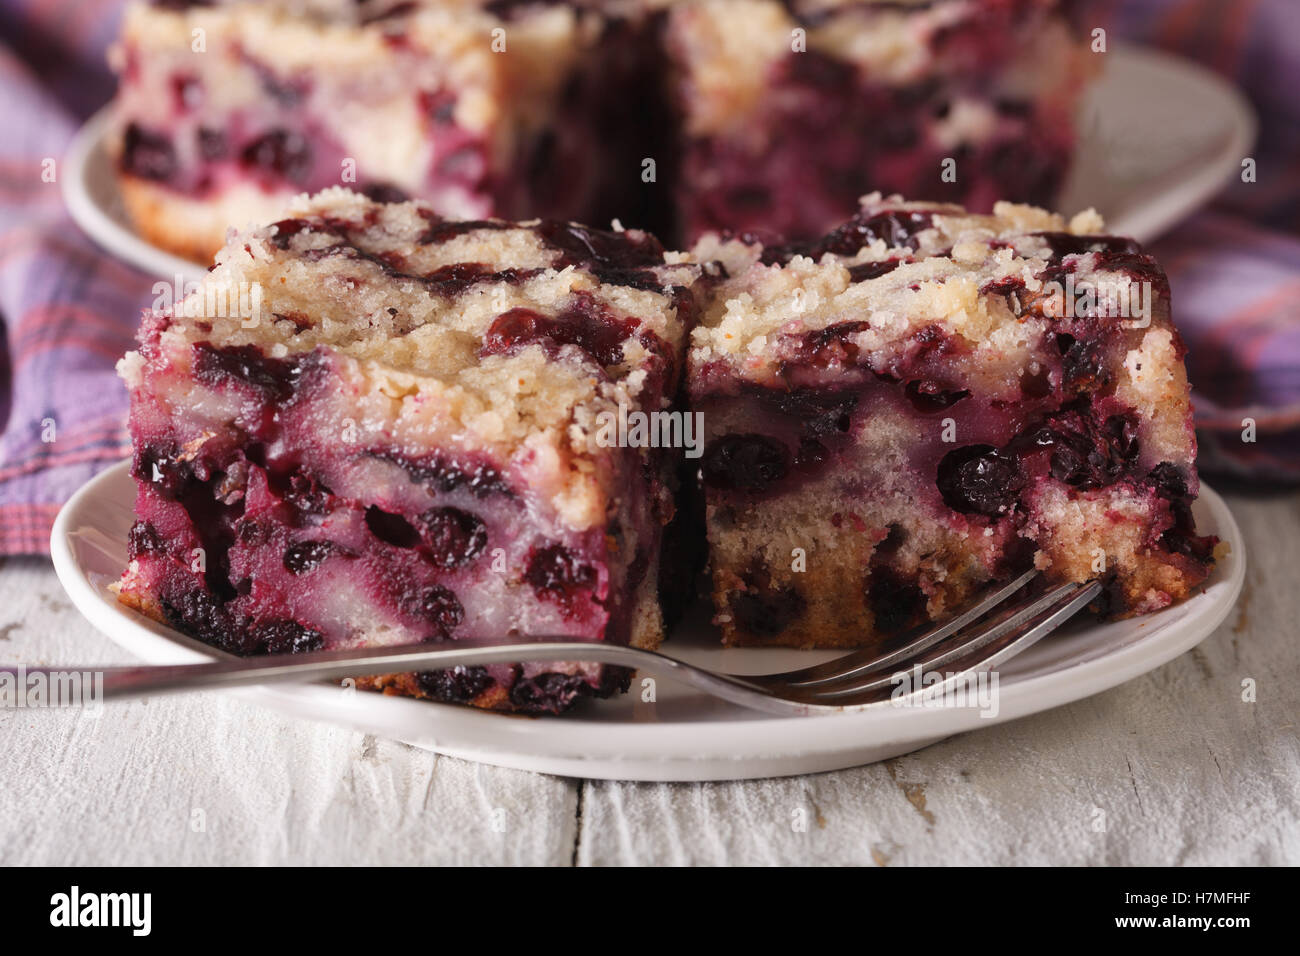 Sponge cake with blueberries close-up on a plate on the table. horizontal Stock Photo